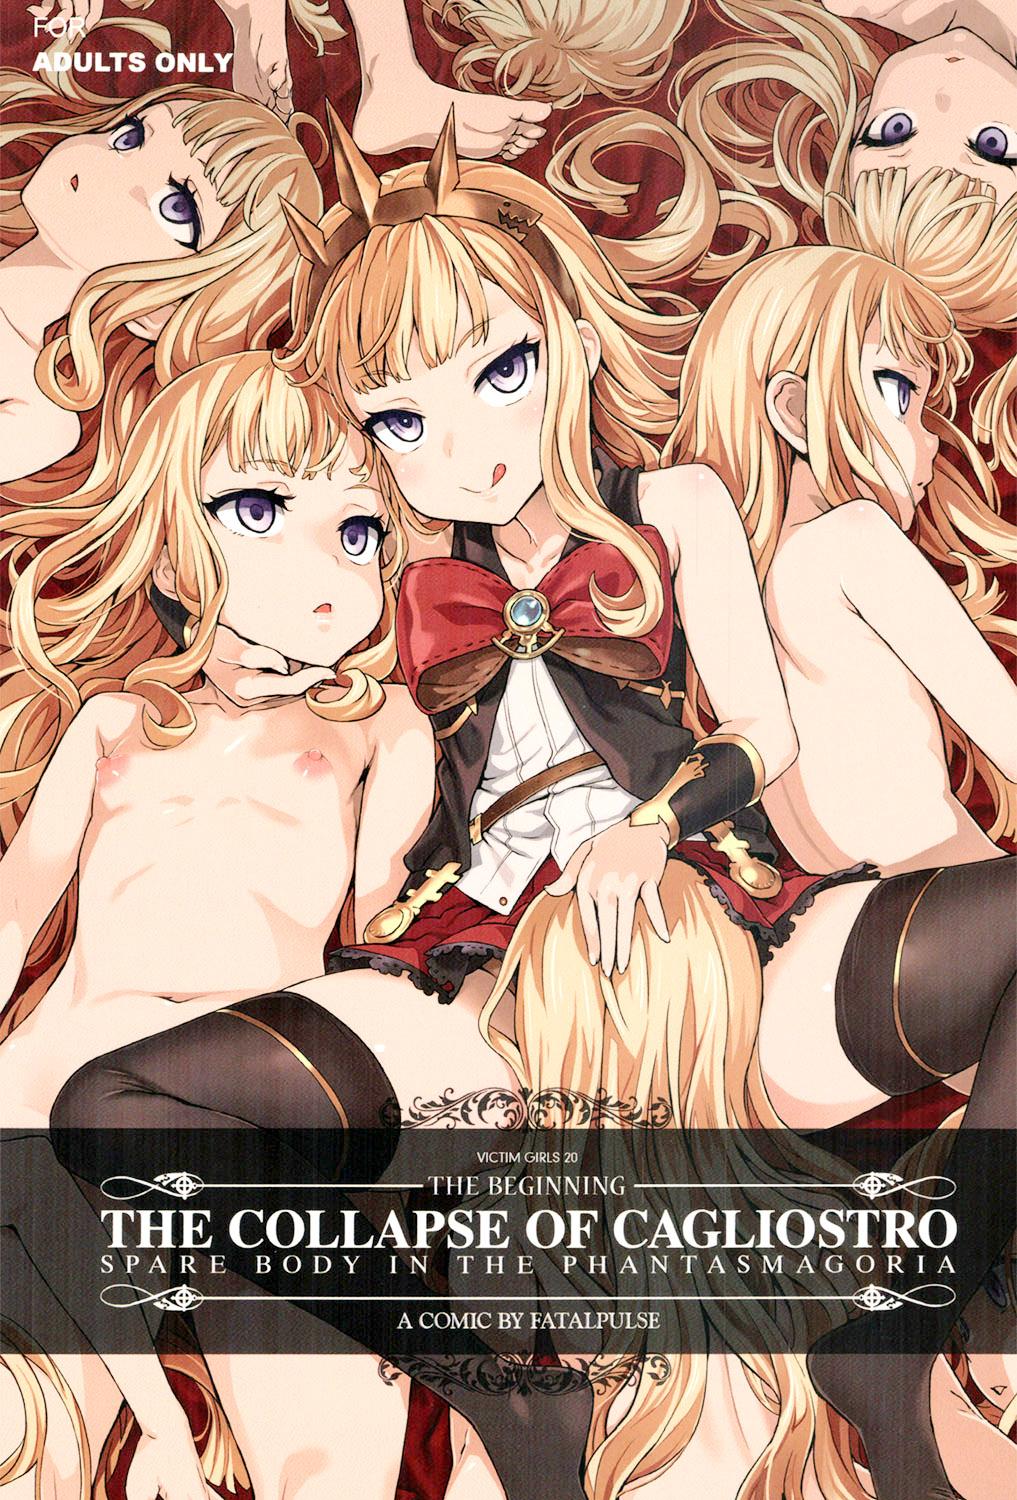 Camgirl Victim Girls 20 THE COLLAPSE OF CAGLIOSTRO - Granblue fantasy Highschool - Page 2